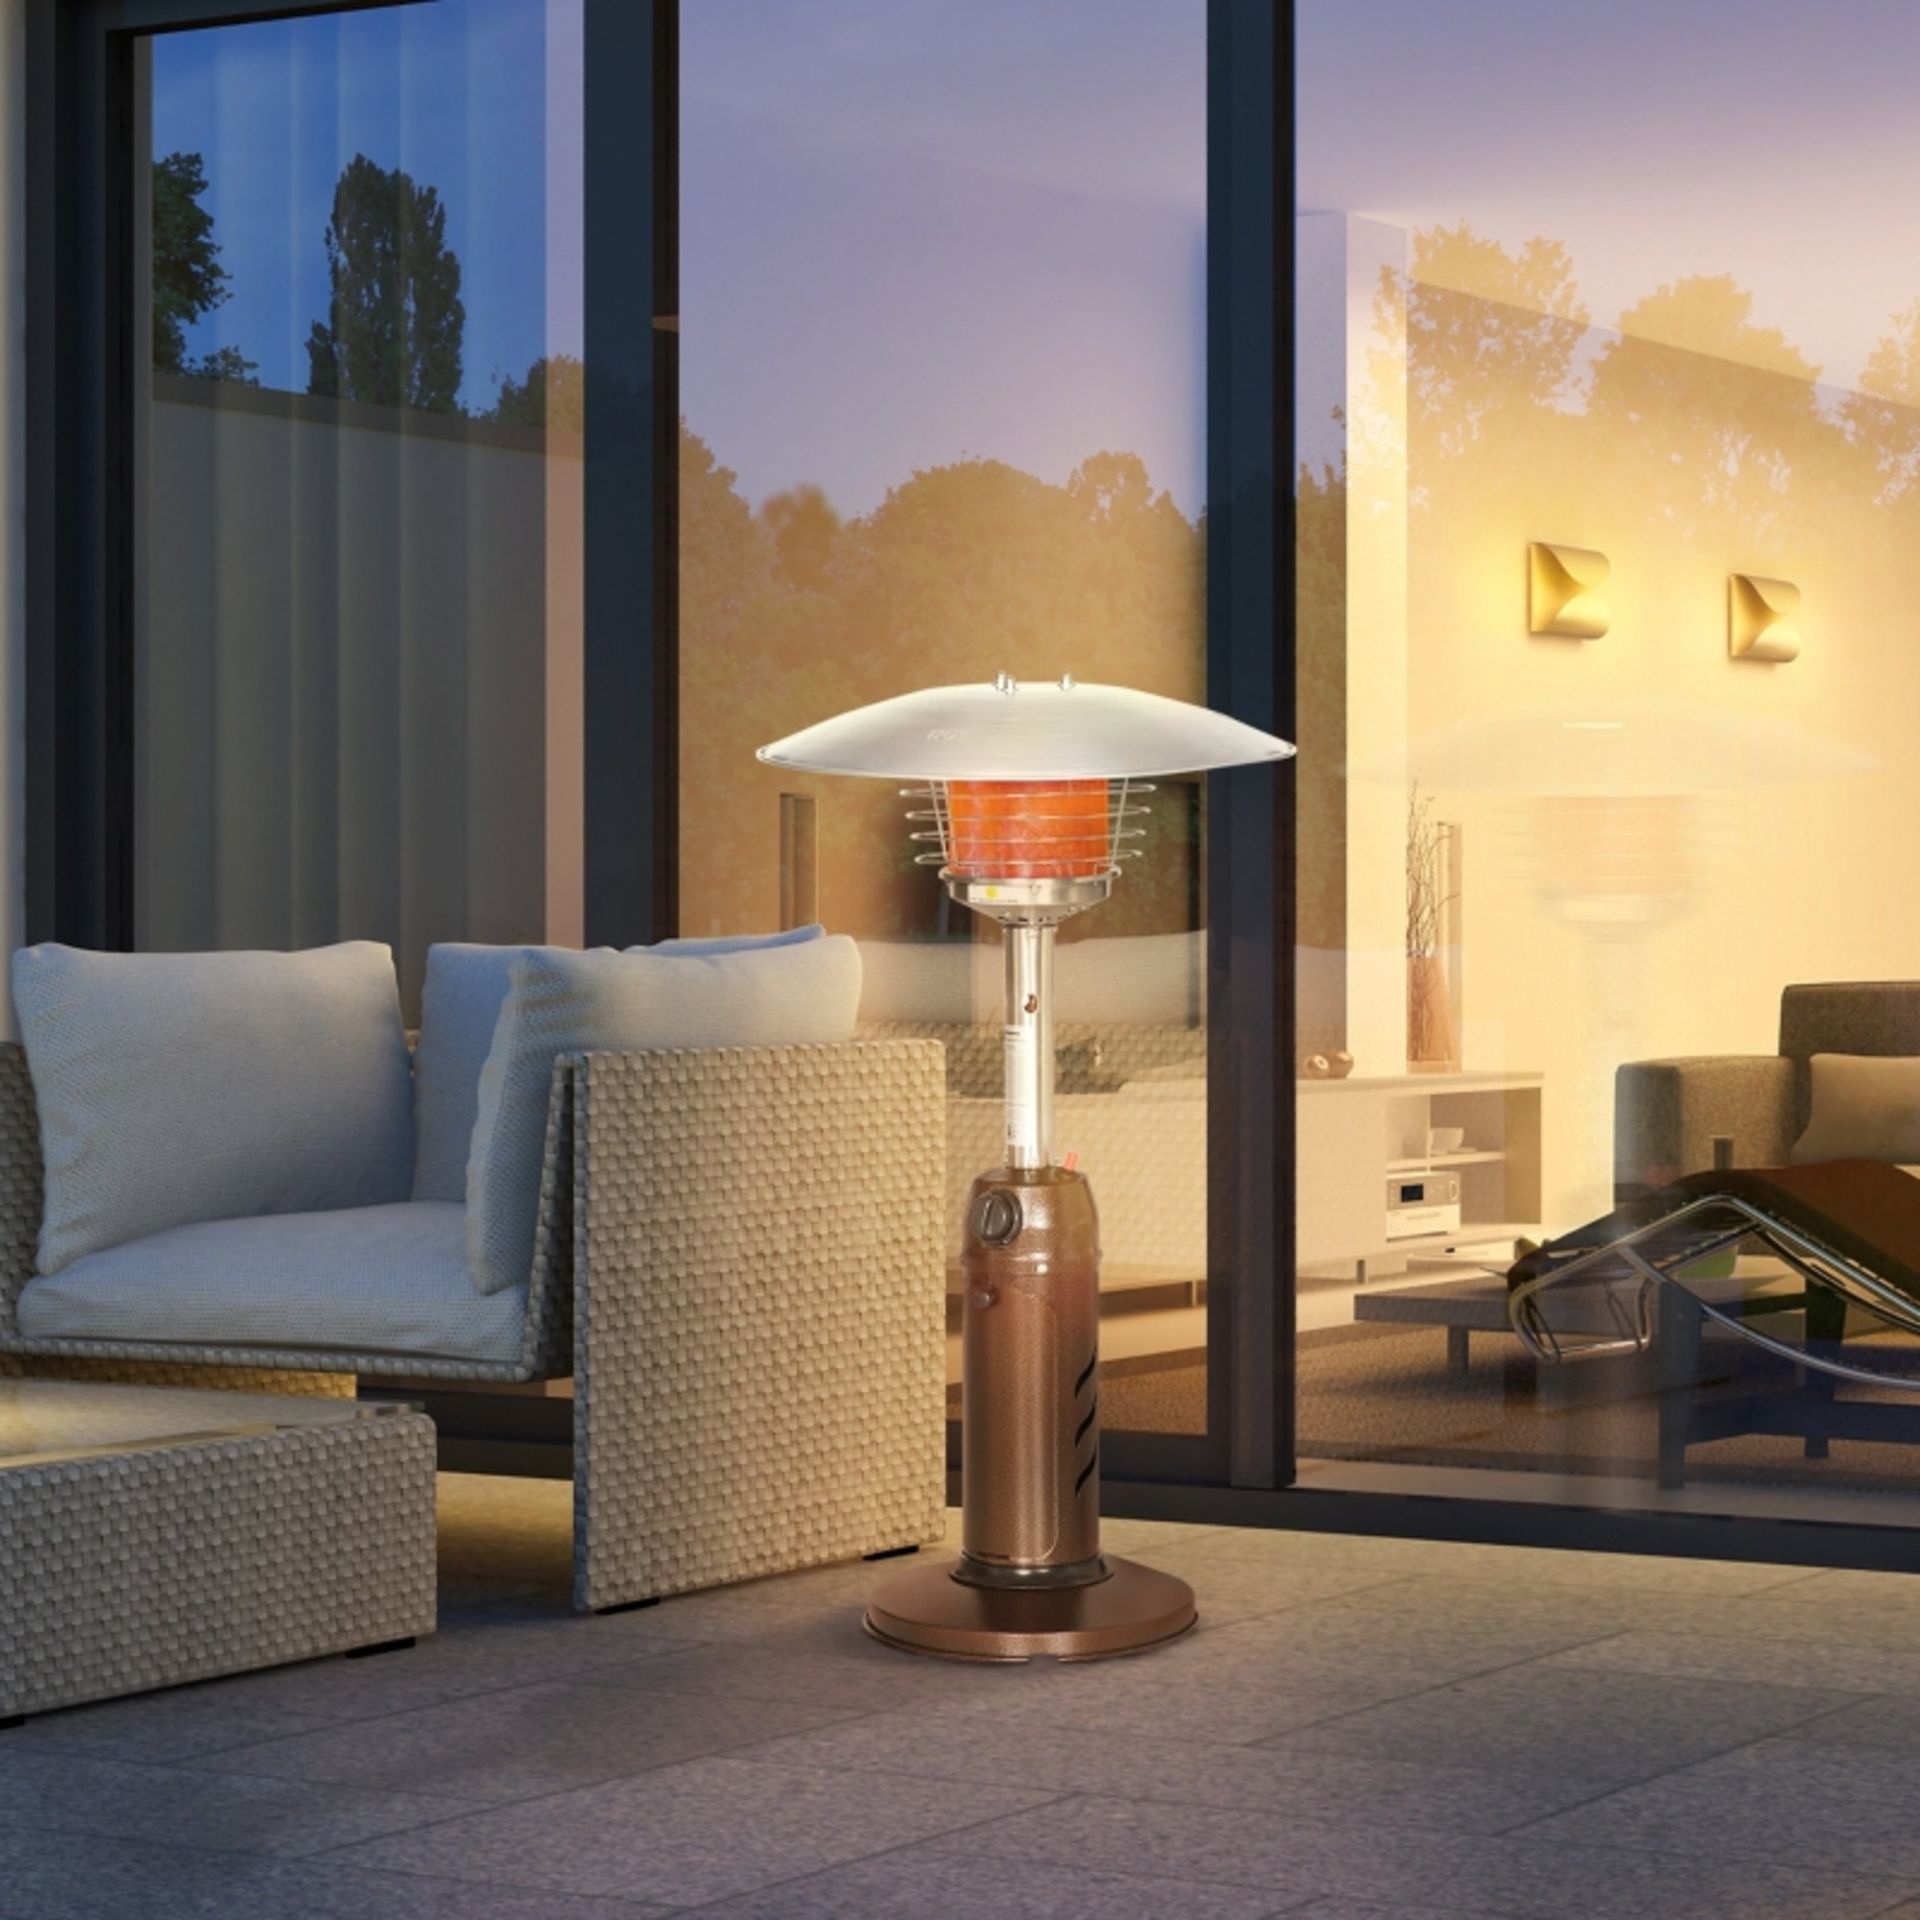 RPP £129.99 -Outsunny Gas Patio Heater with Tip-over Protection, Outdoor Heater with Piezo Ignition,